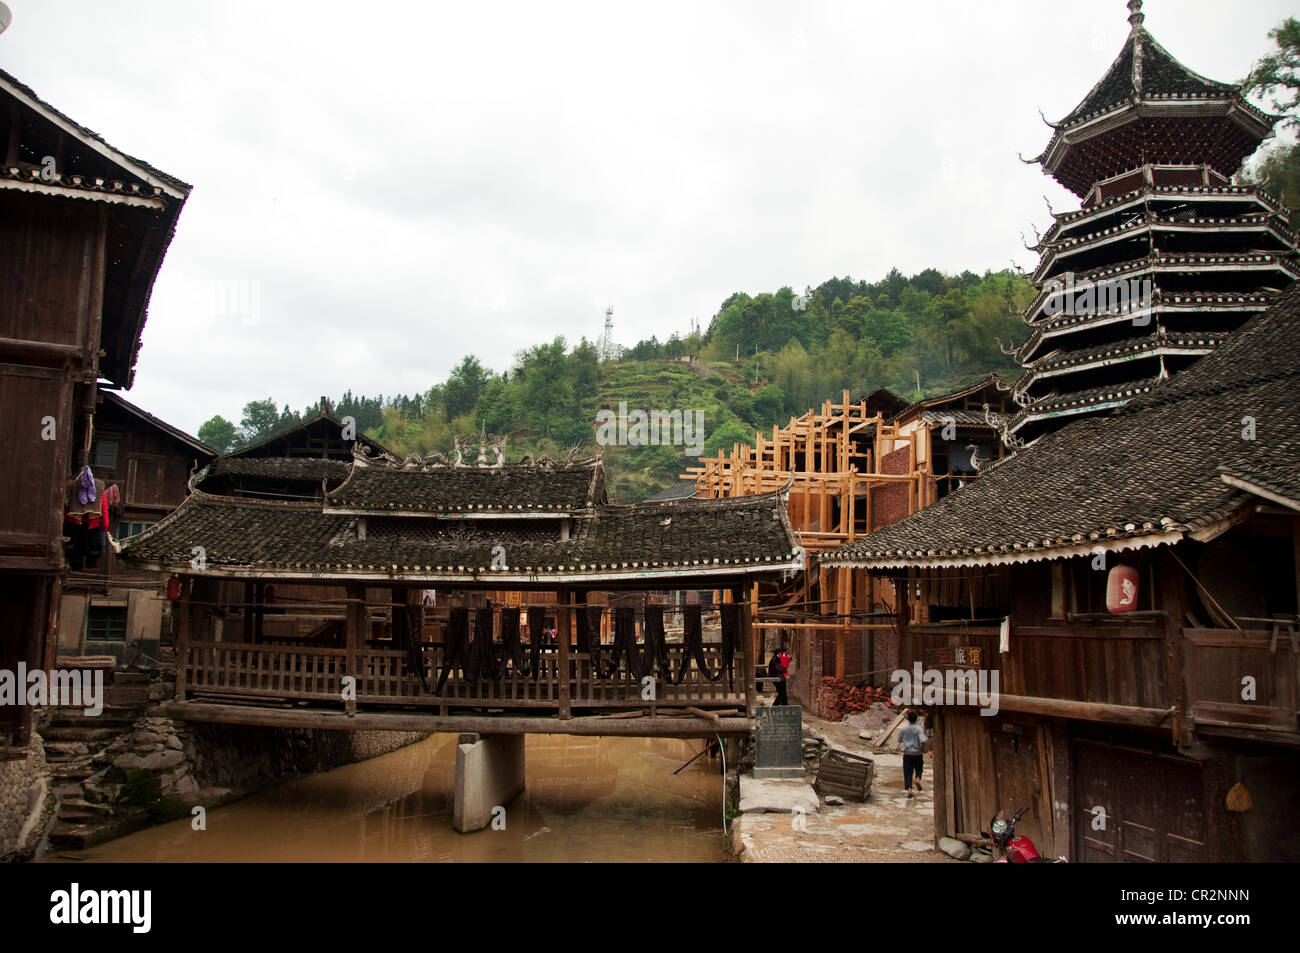 A small 'Wind and Rain' bridge on a water stream and an ancient Drum Tower, Zhaoxing Dong Village, China Stock Photo